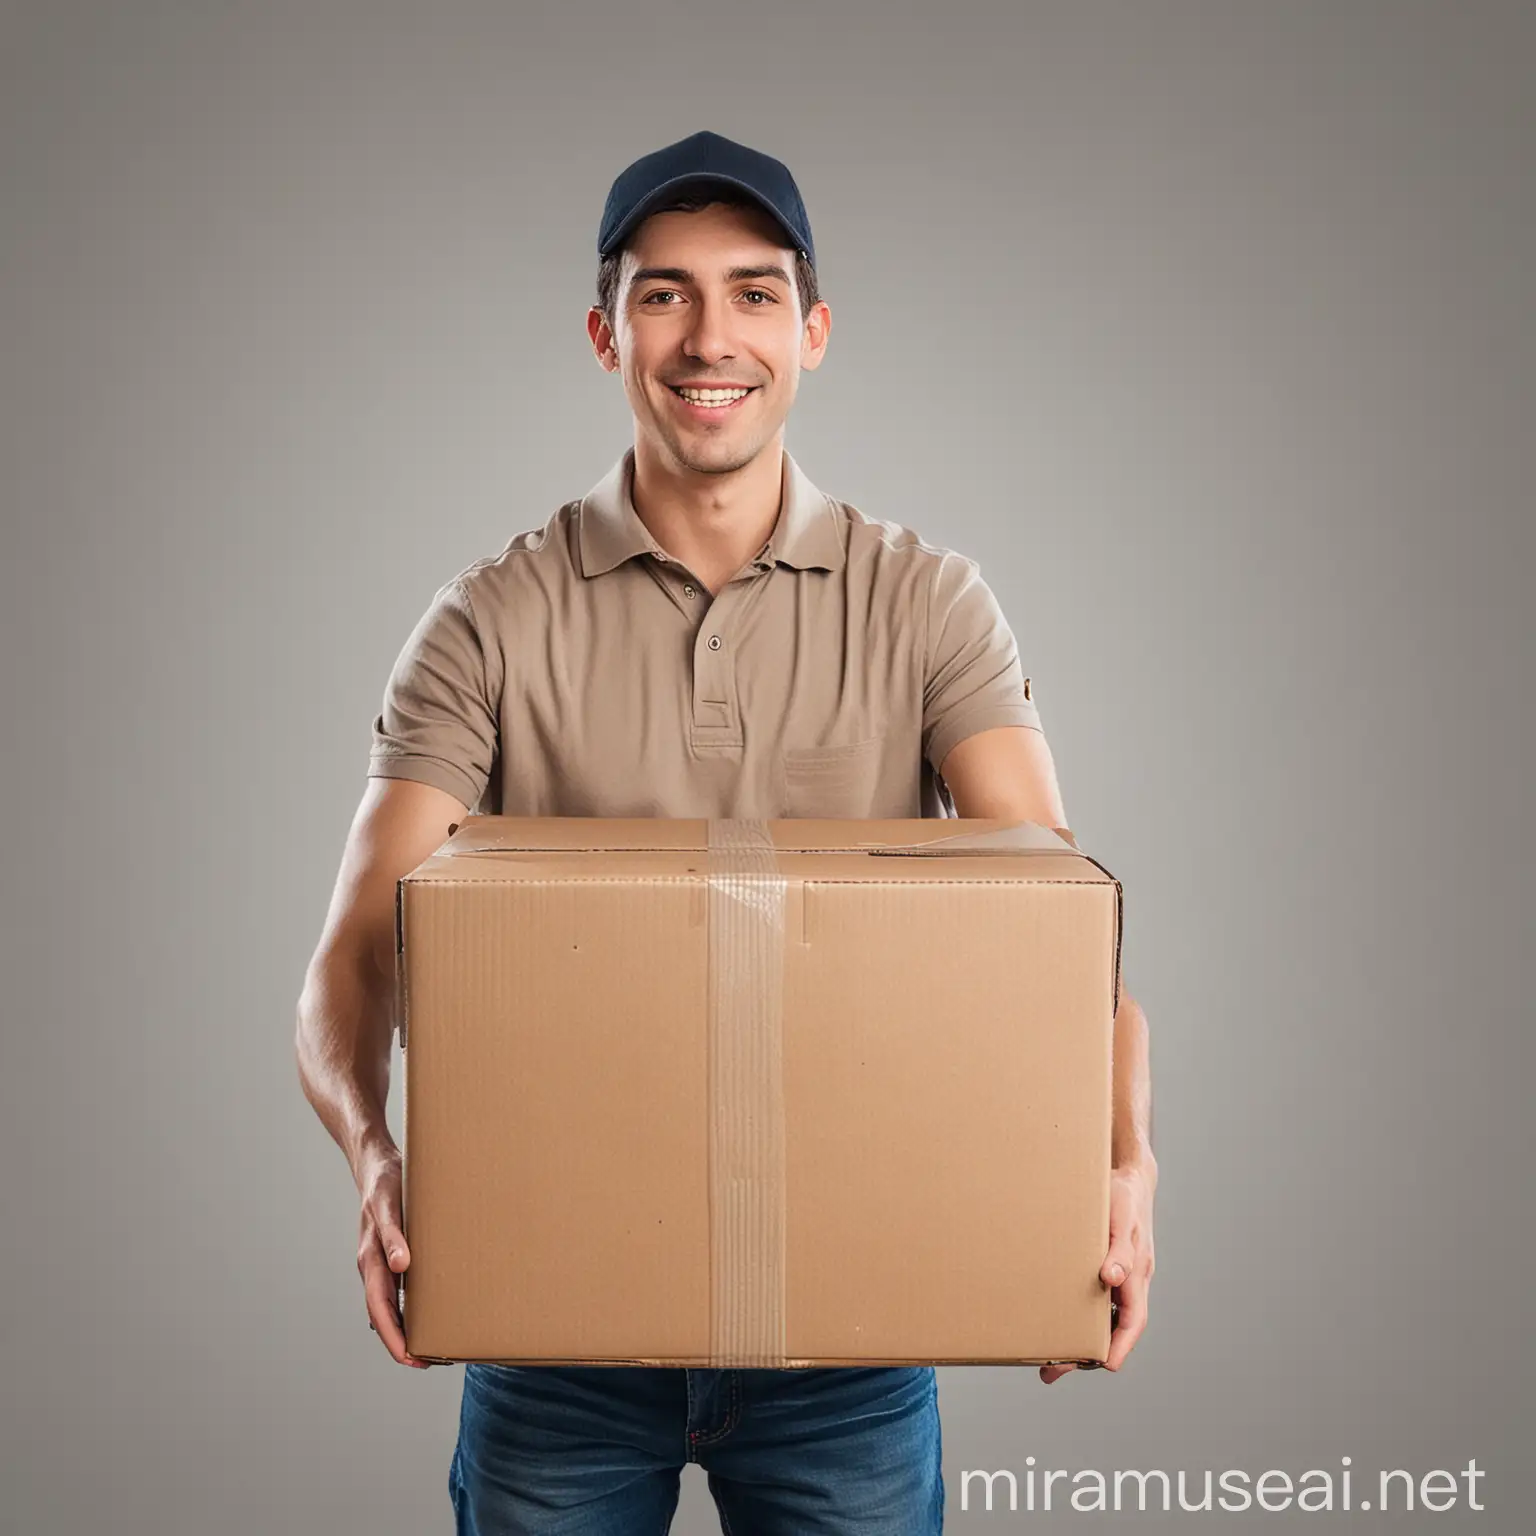 Package Delivery Person Transparent Background PNG